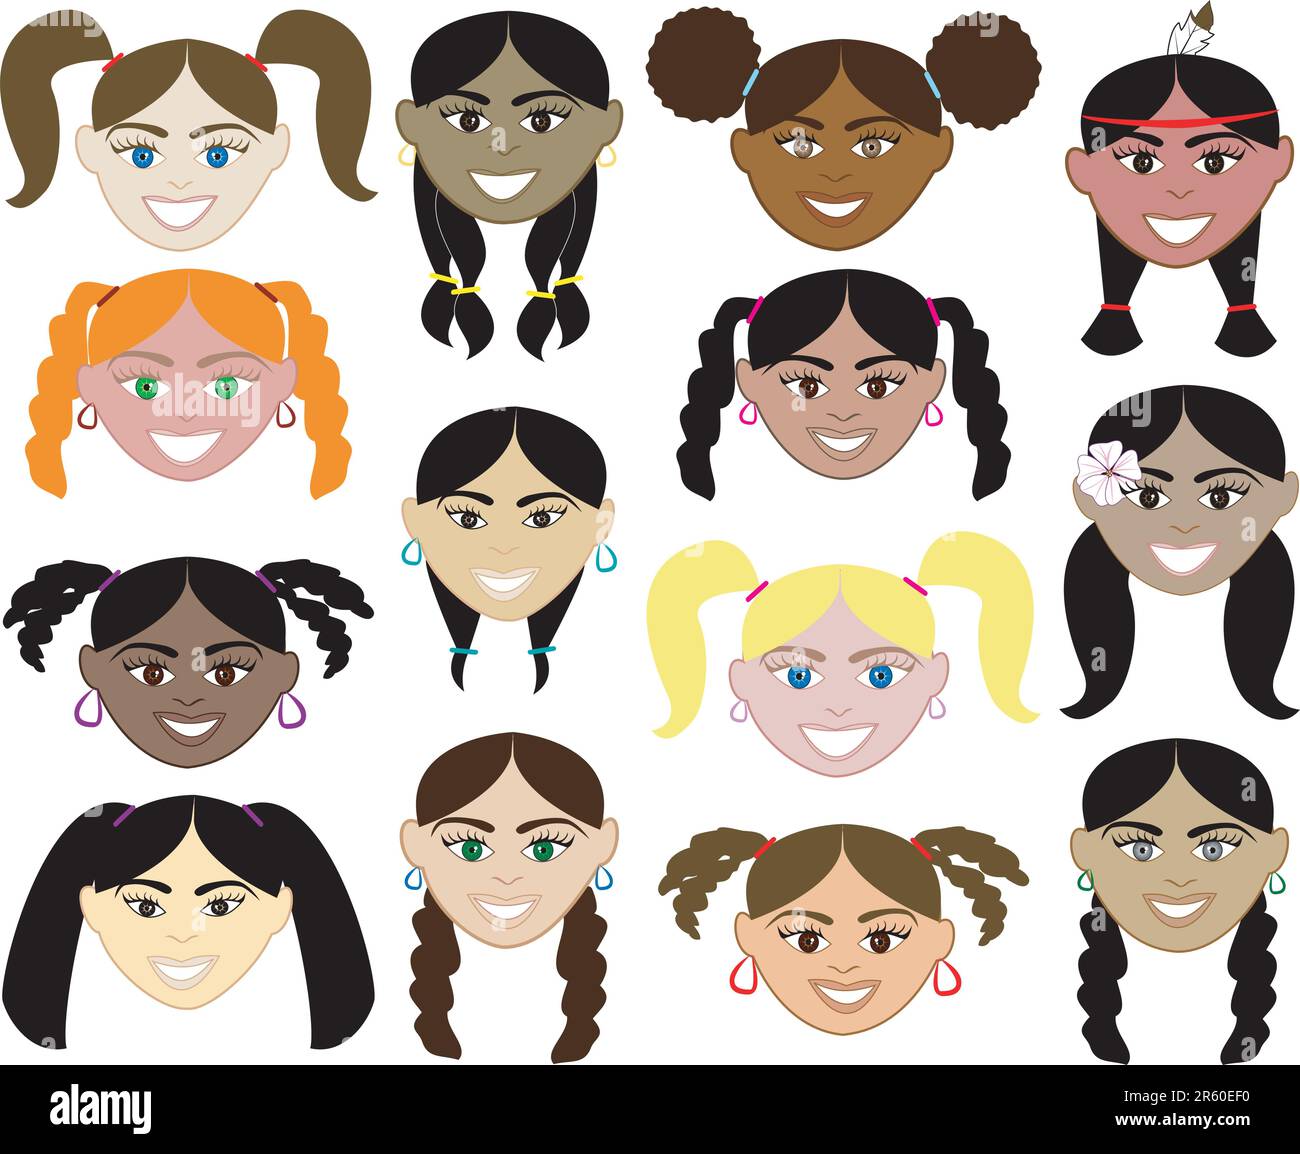 14 Girls Faces 2. Also with colorful background or plain and with men, women, children and boys. Stock Vector